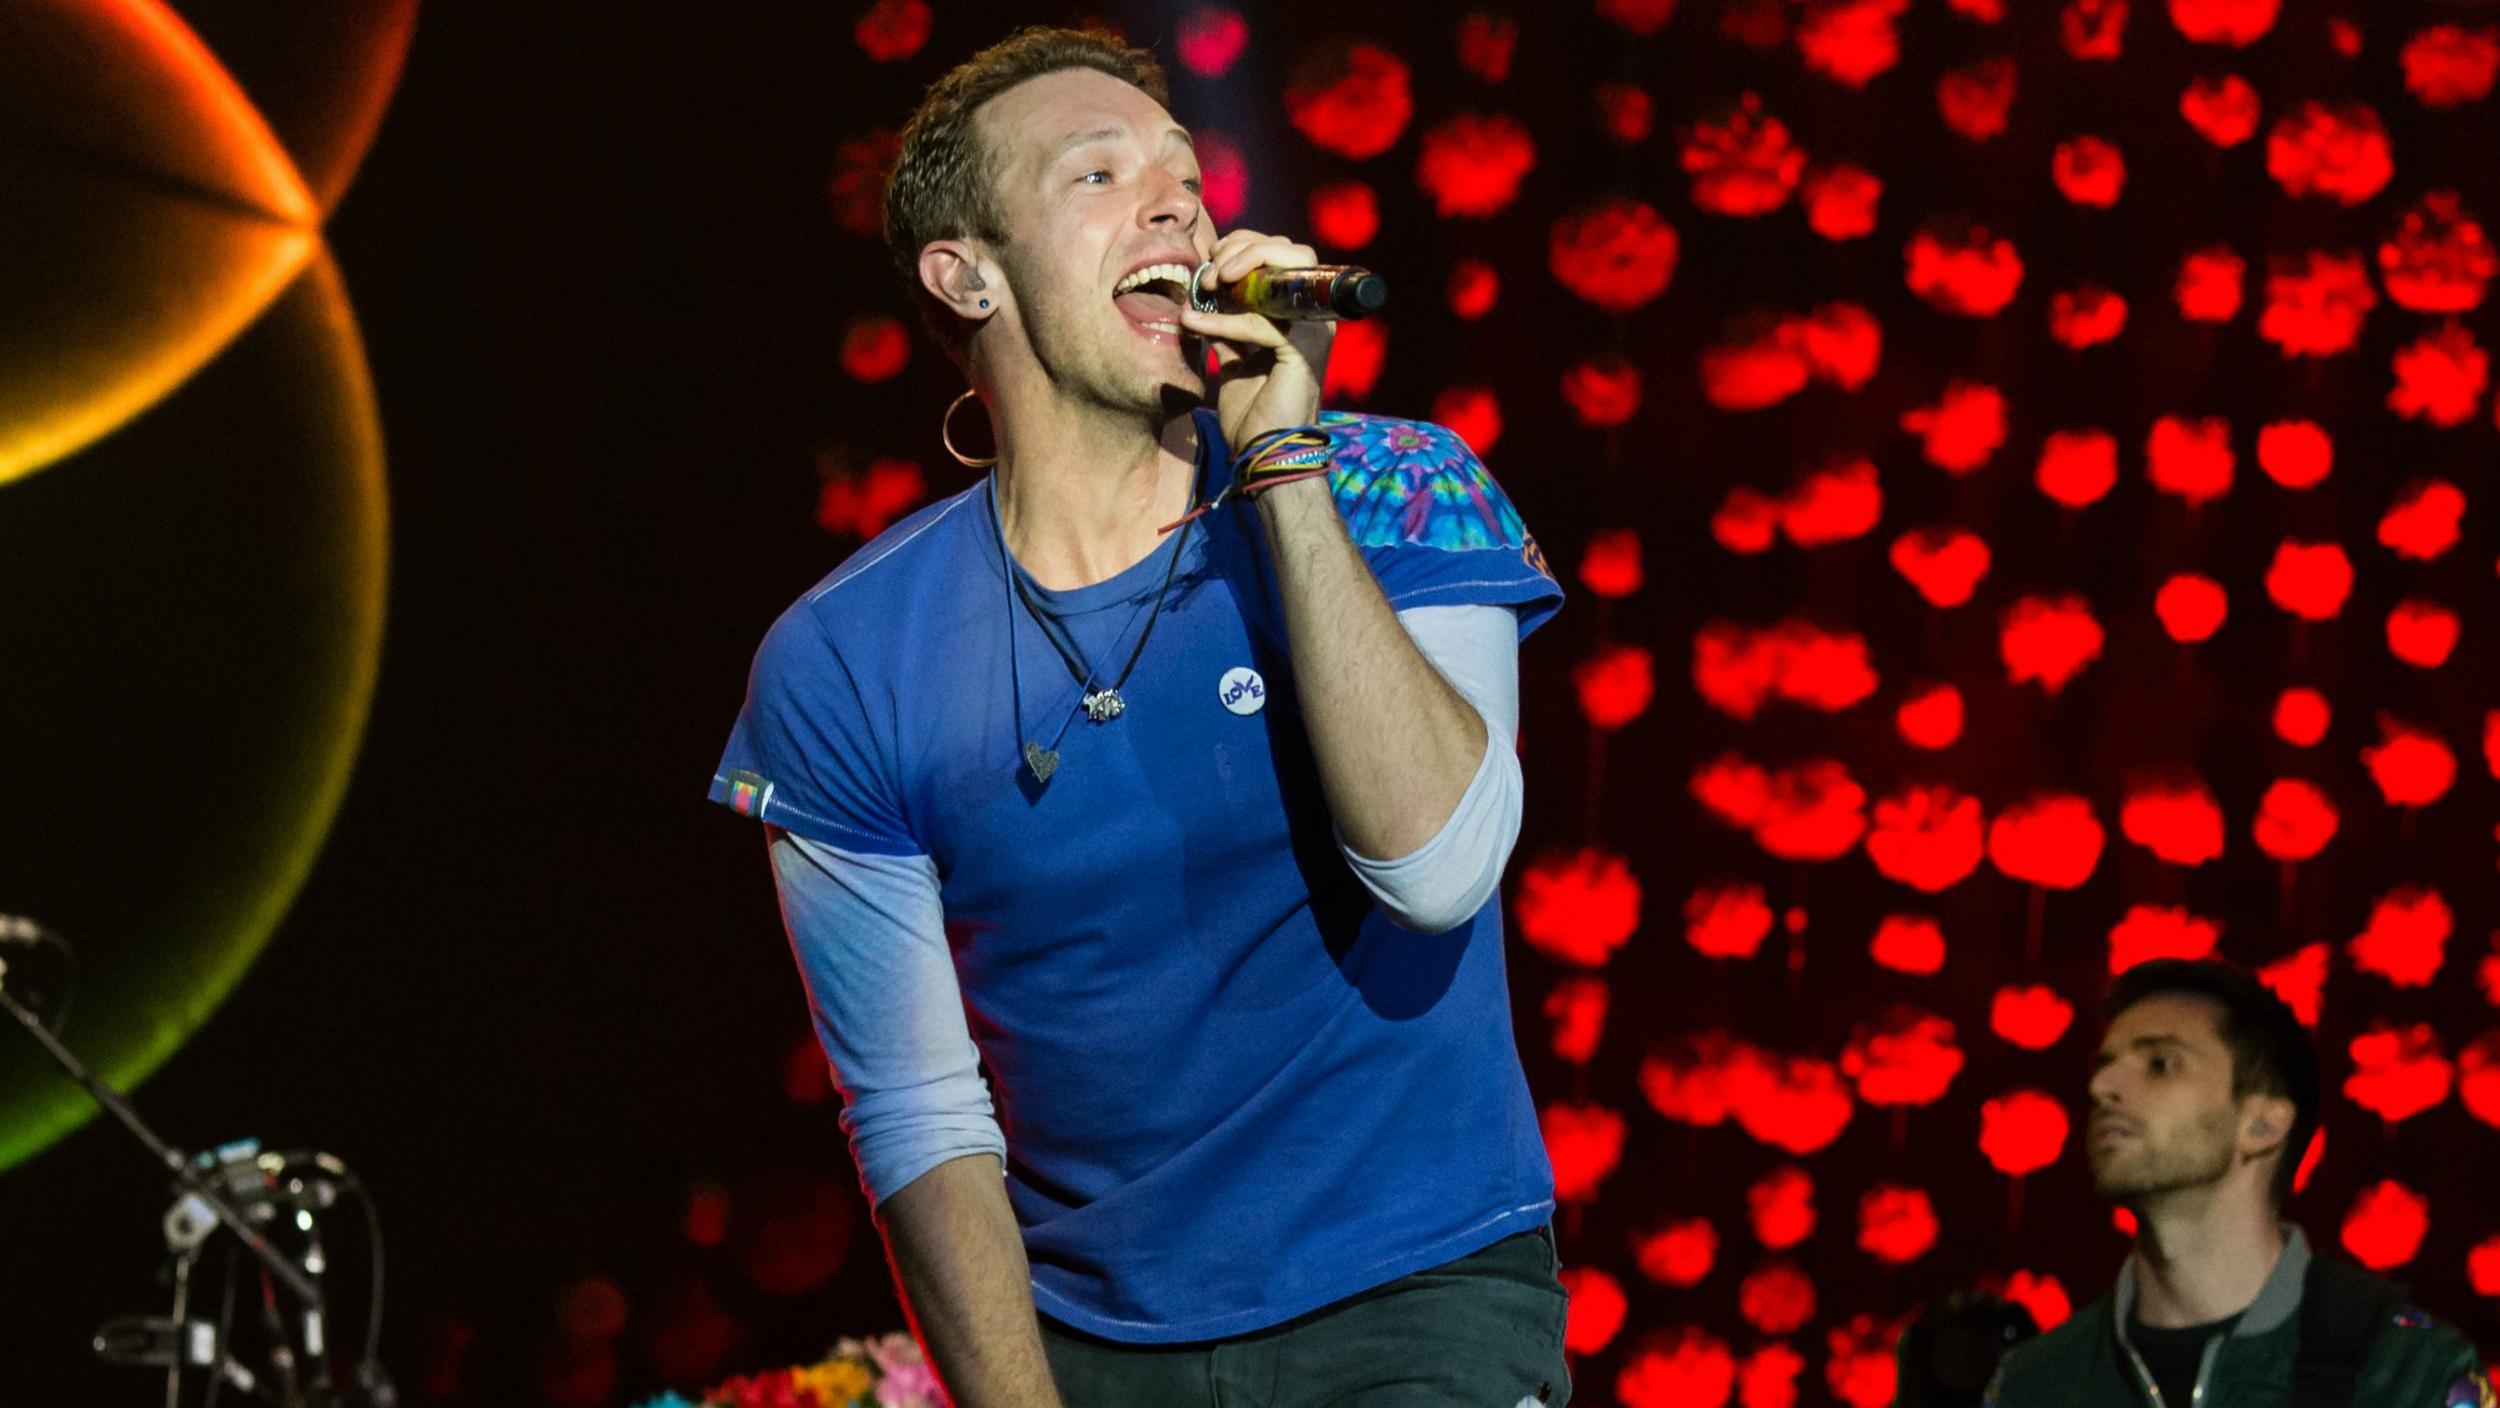 Coldplay perform on the Pyramid Stage on Sunday night of Glastonbury Festival